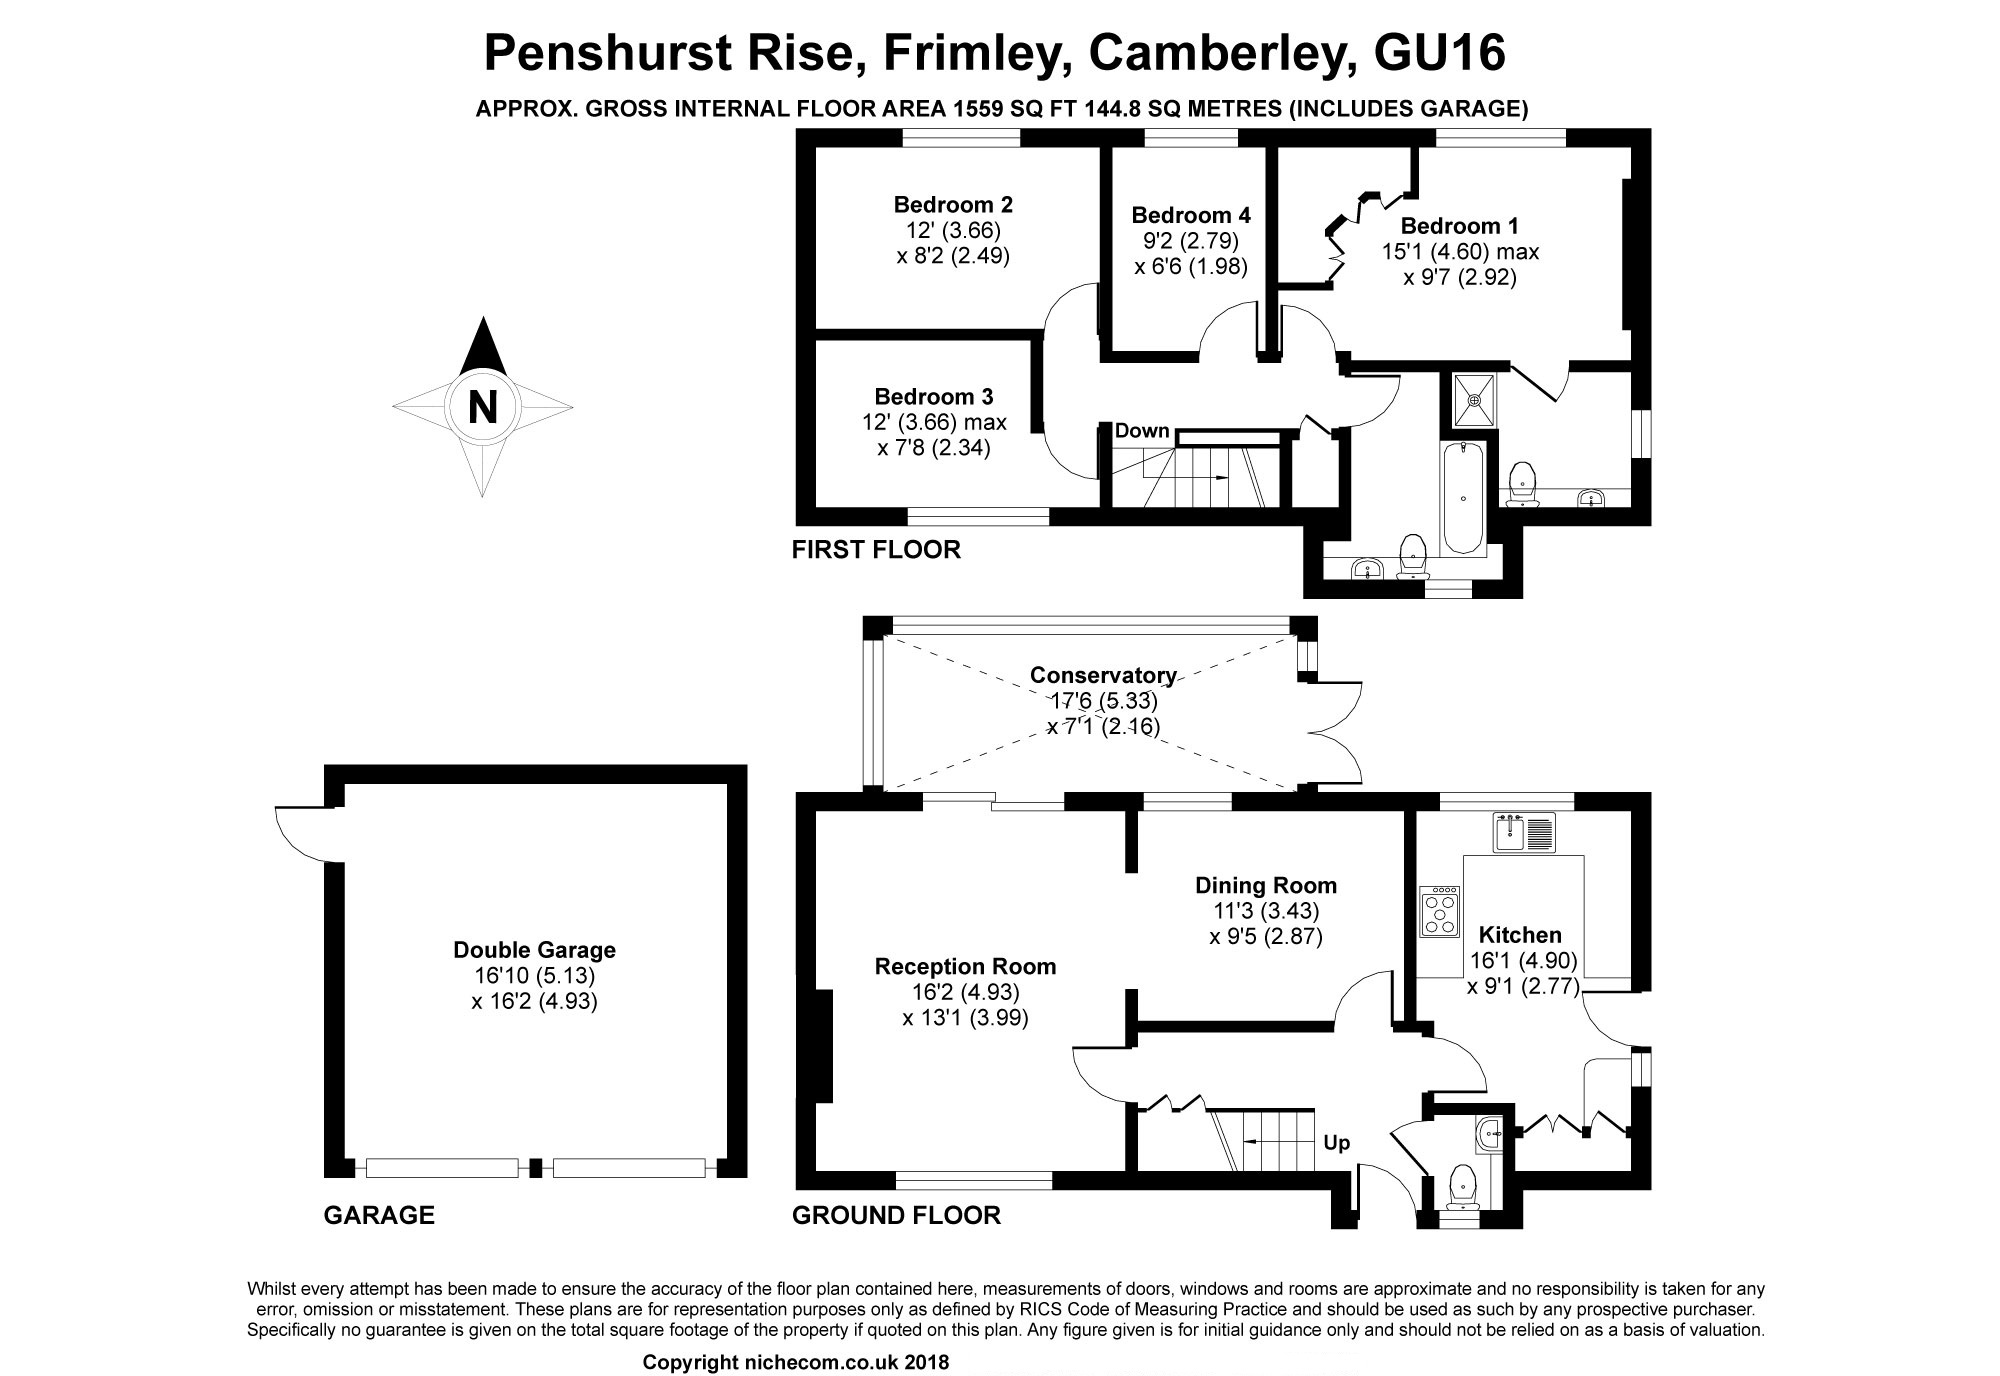 4 Bedrooms Detached house for sale in Penshurst Rise, Frimley, Camberley GU16